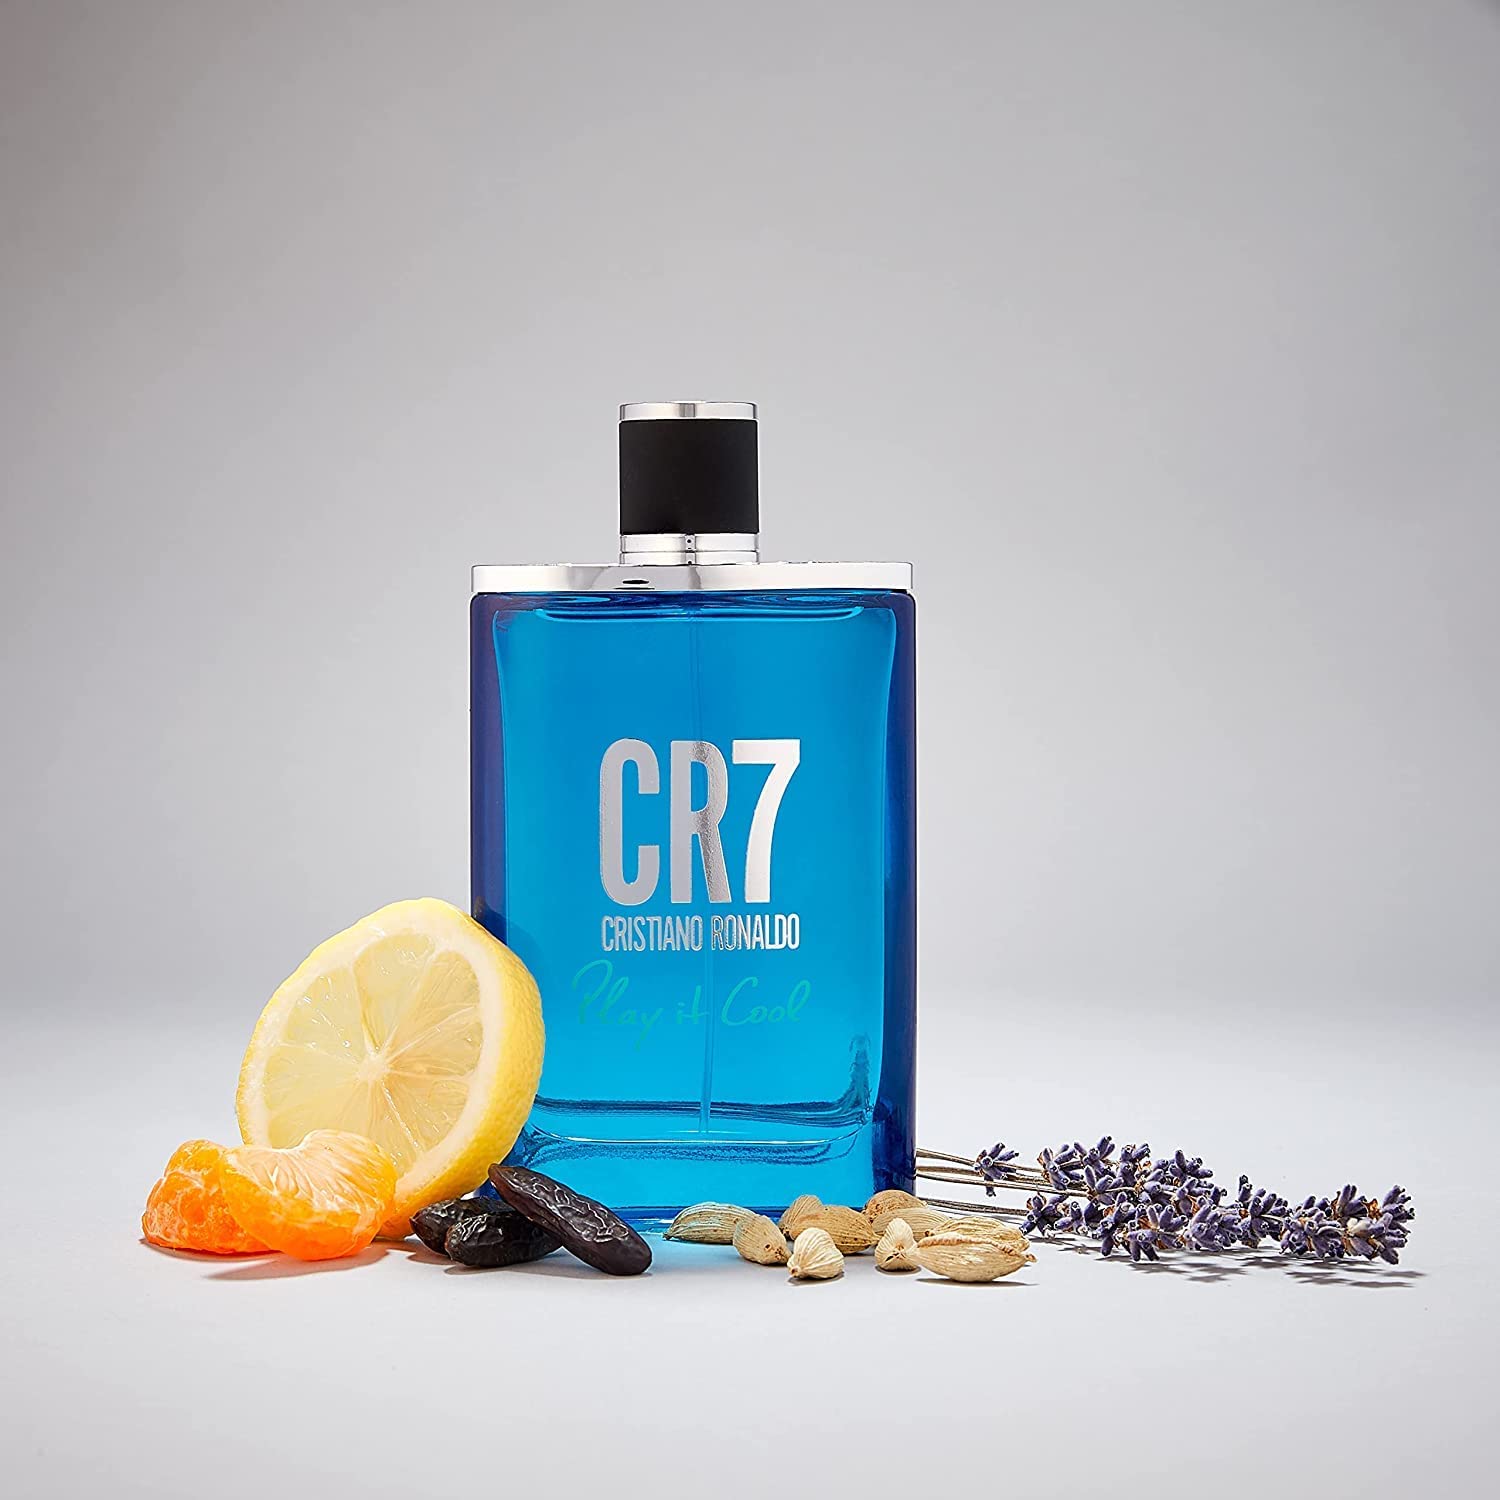 CR7 Cristiano Ronaldo Play It Cool Eau De Toilette - A bottle of refreshing blue liquid accompanied by a selection of dried fruit. This unique fragrance combines light, fresh notes with a sophisticated composition, perfect for everyday wear. An energizing citrus and herbal aroma, designed for the active and energetic man.